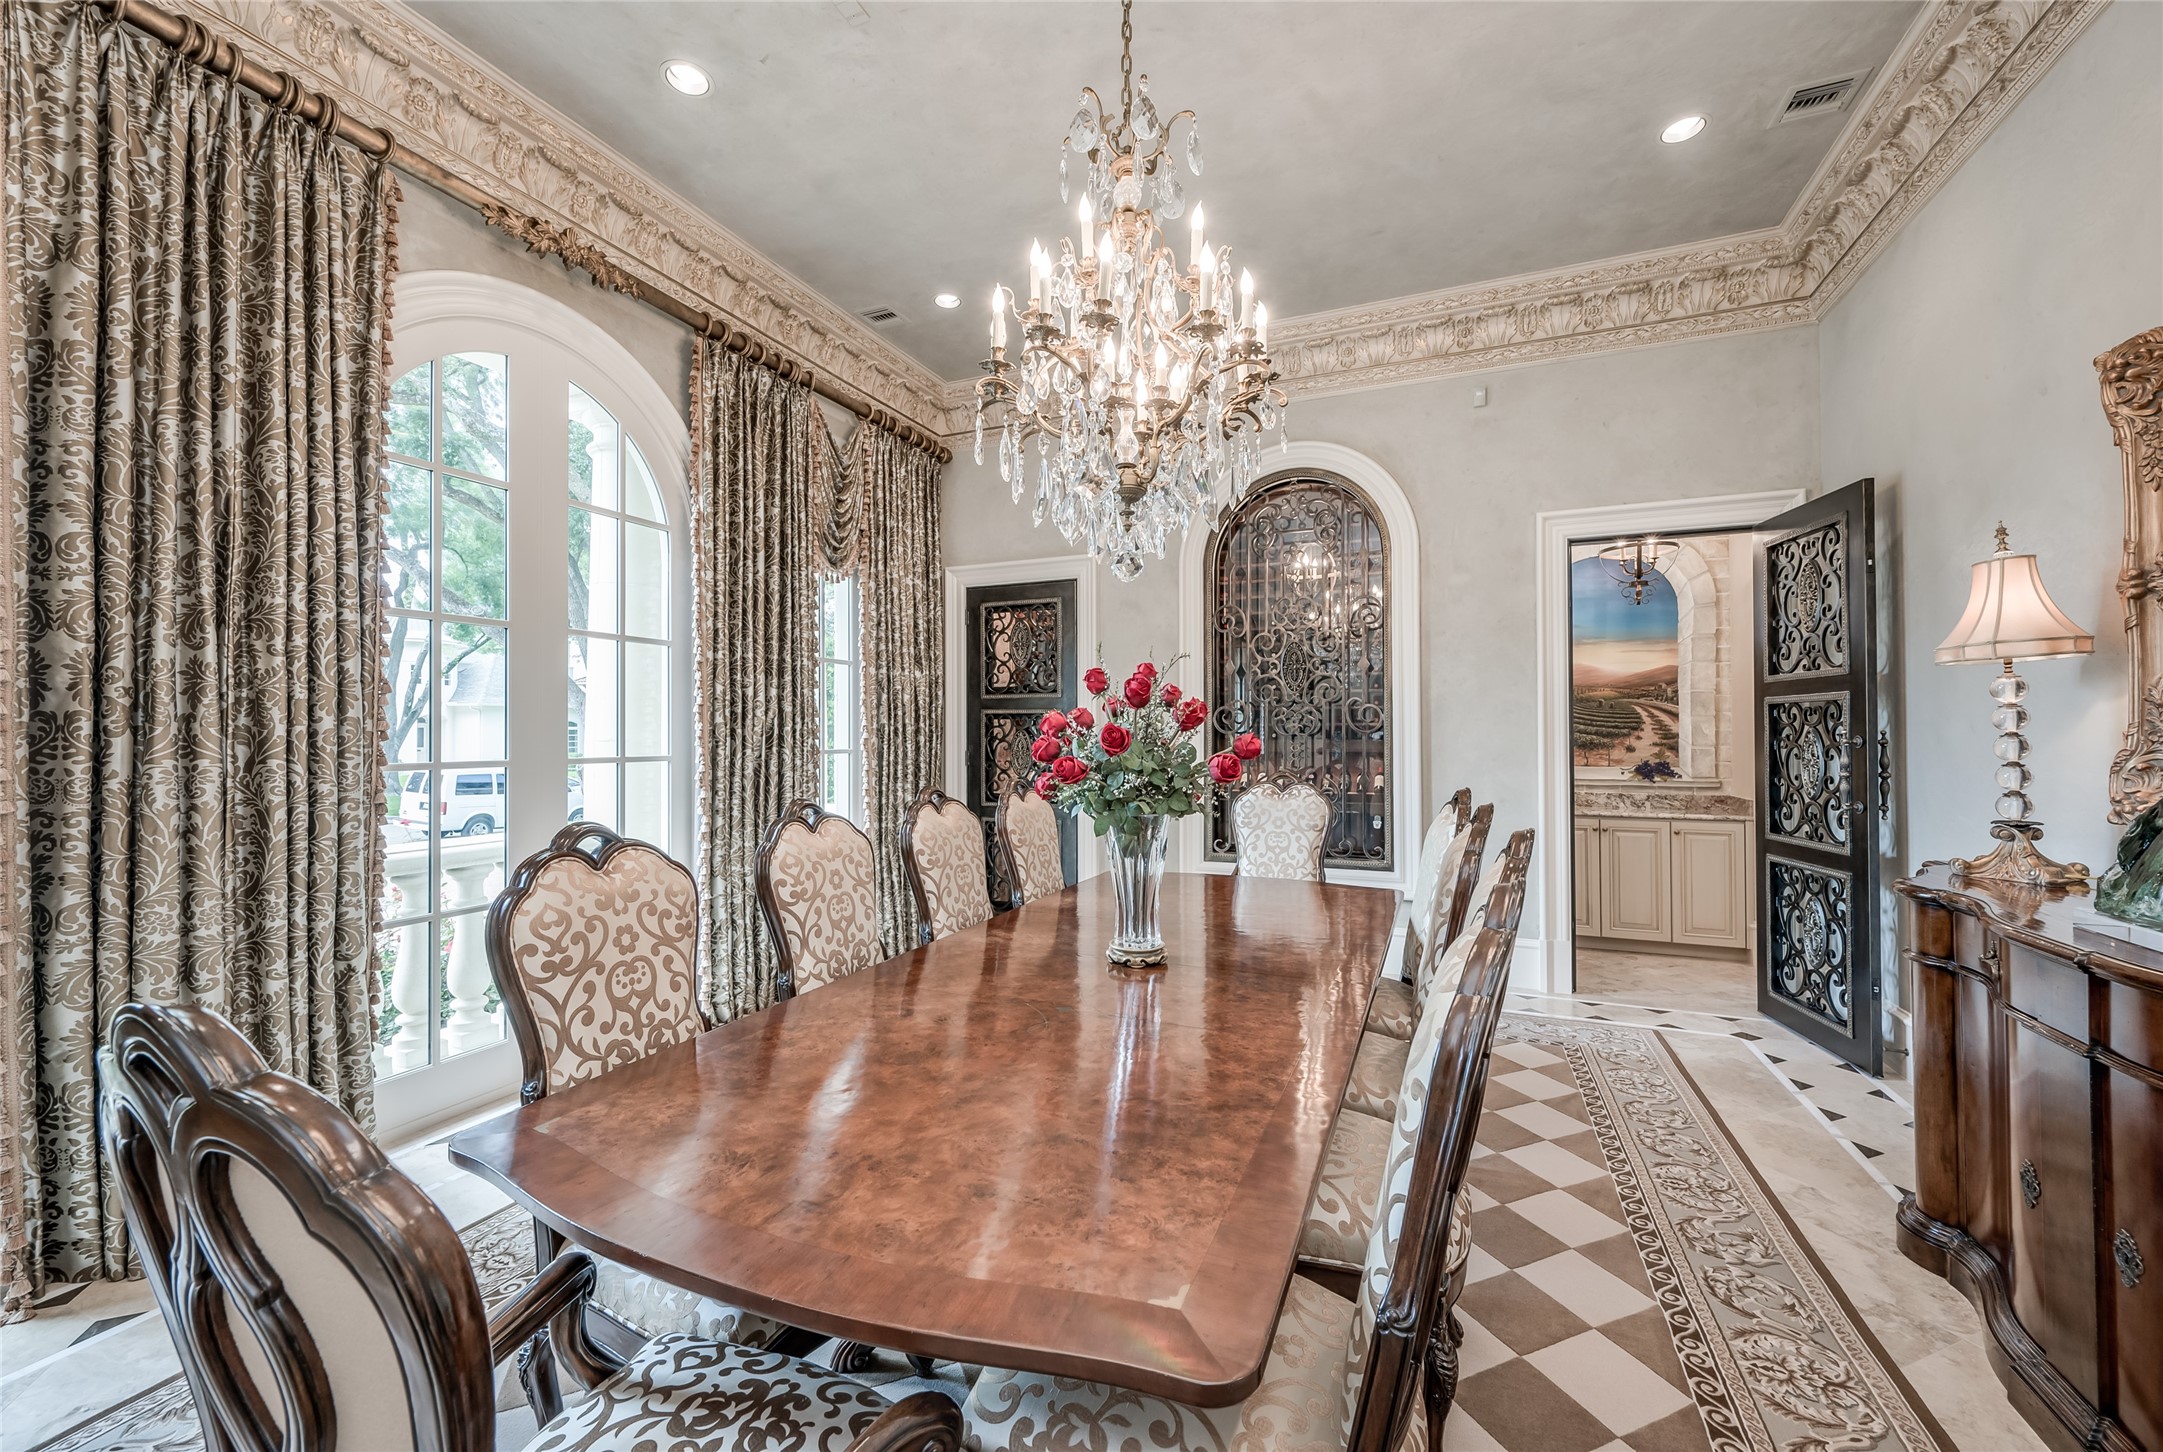 [Dining Room]
The dining room, enhanced by deep, faux gilt acanthus-leaf molding, includes a temperature-controlled wine vault with glass and bronzed-steel door and window, a brick floor, and storage for approximately 700 bottles.